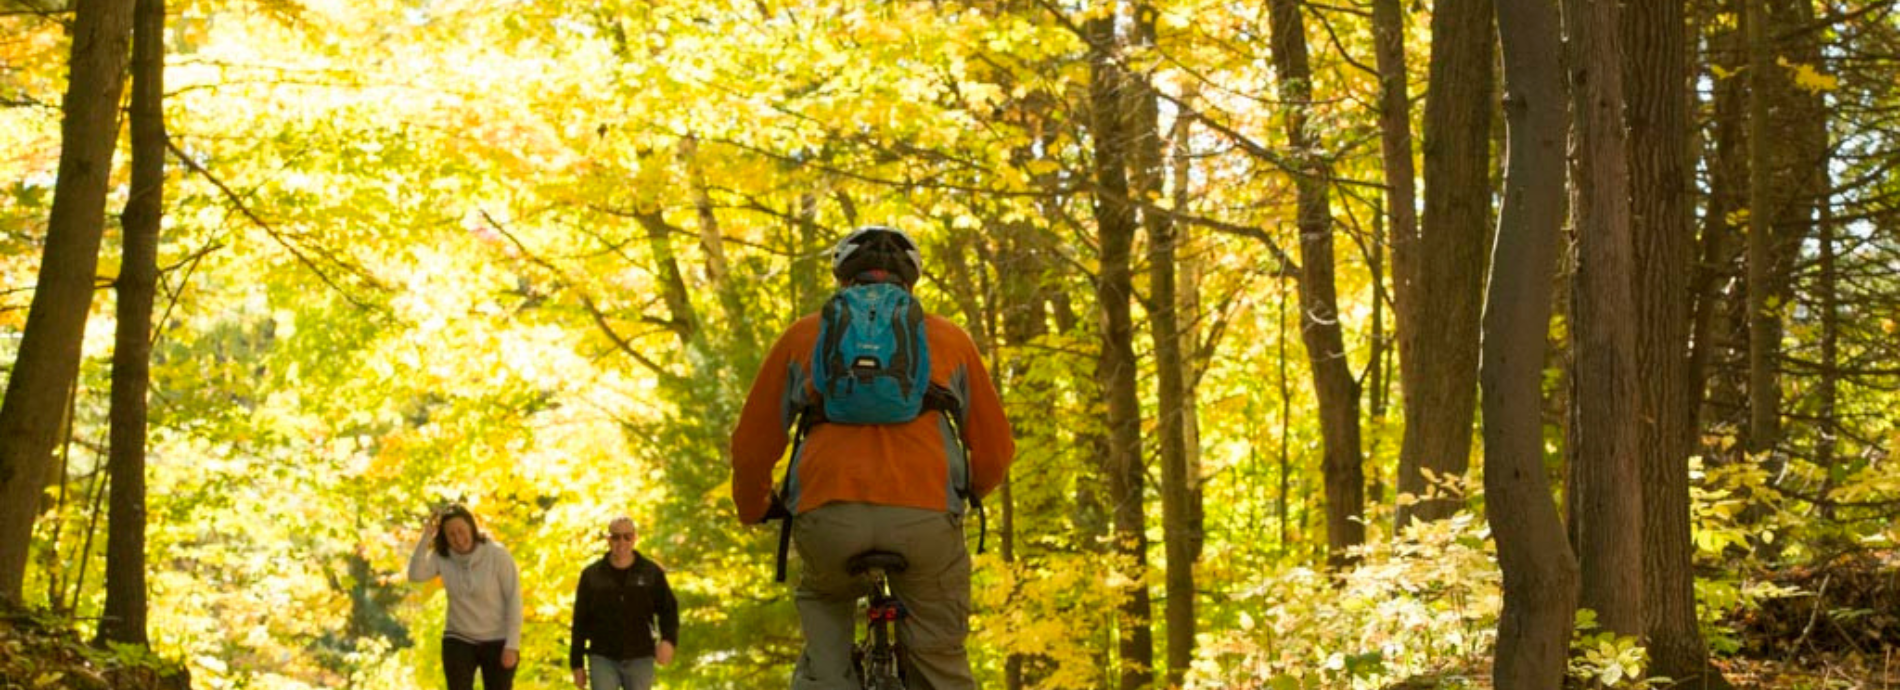 cyclists and hikers on a trail in fall